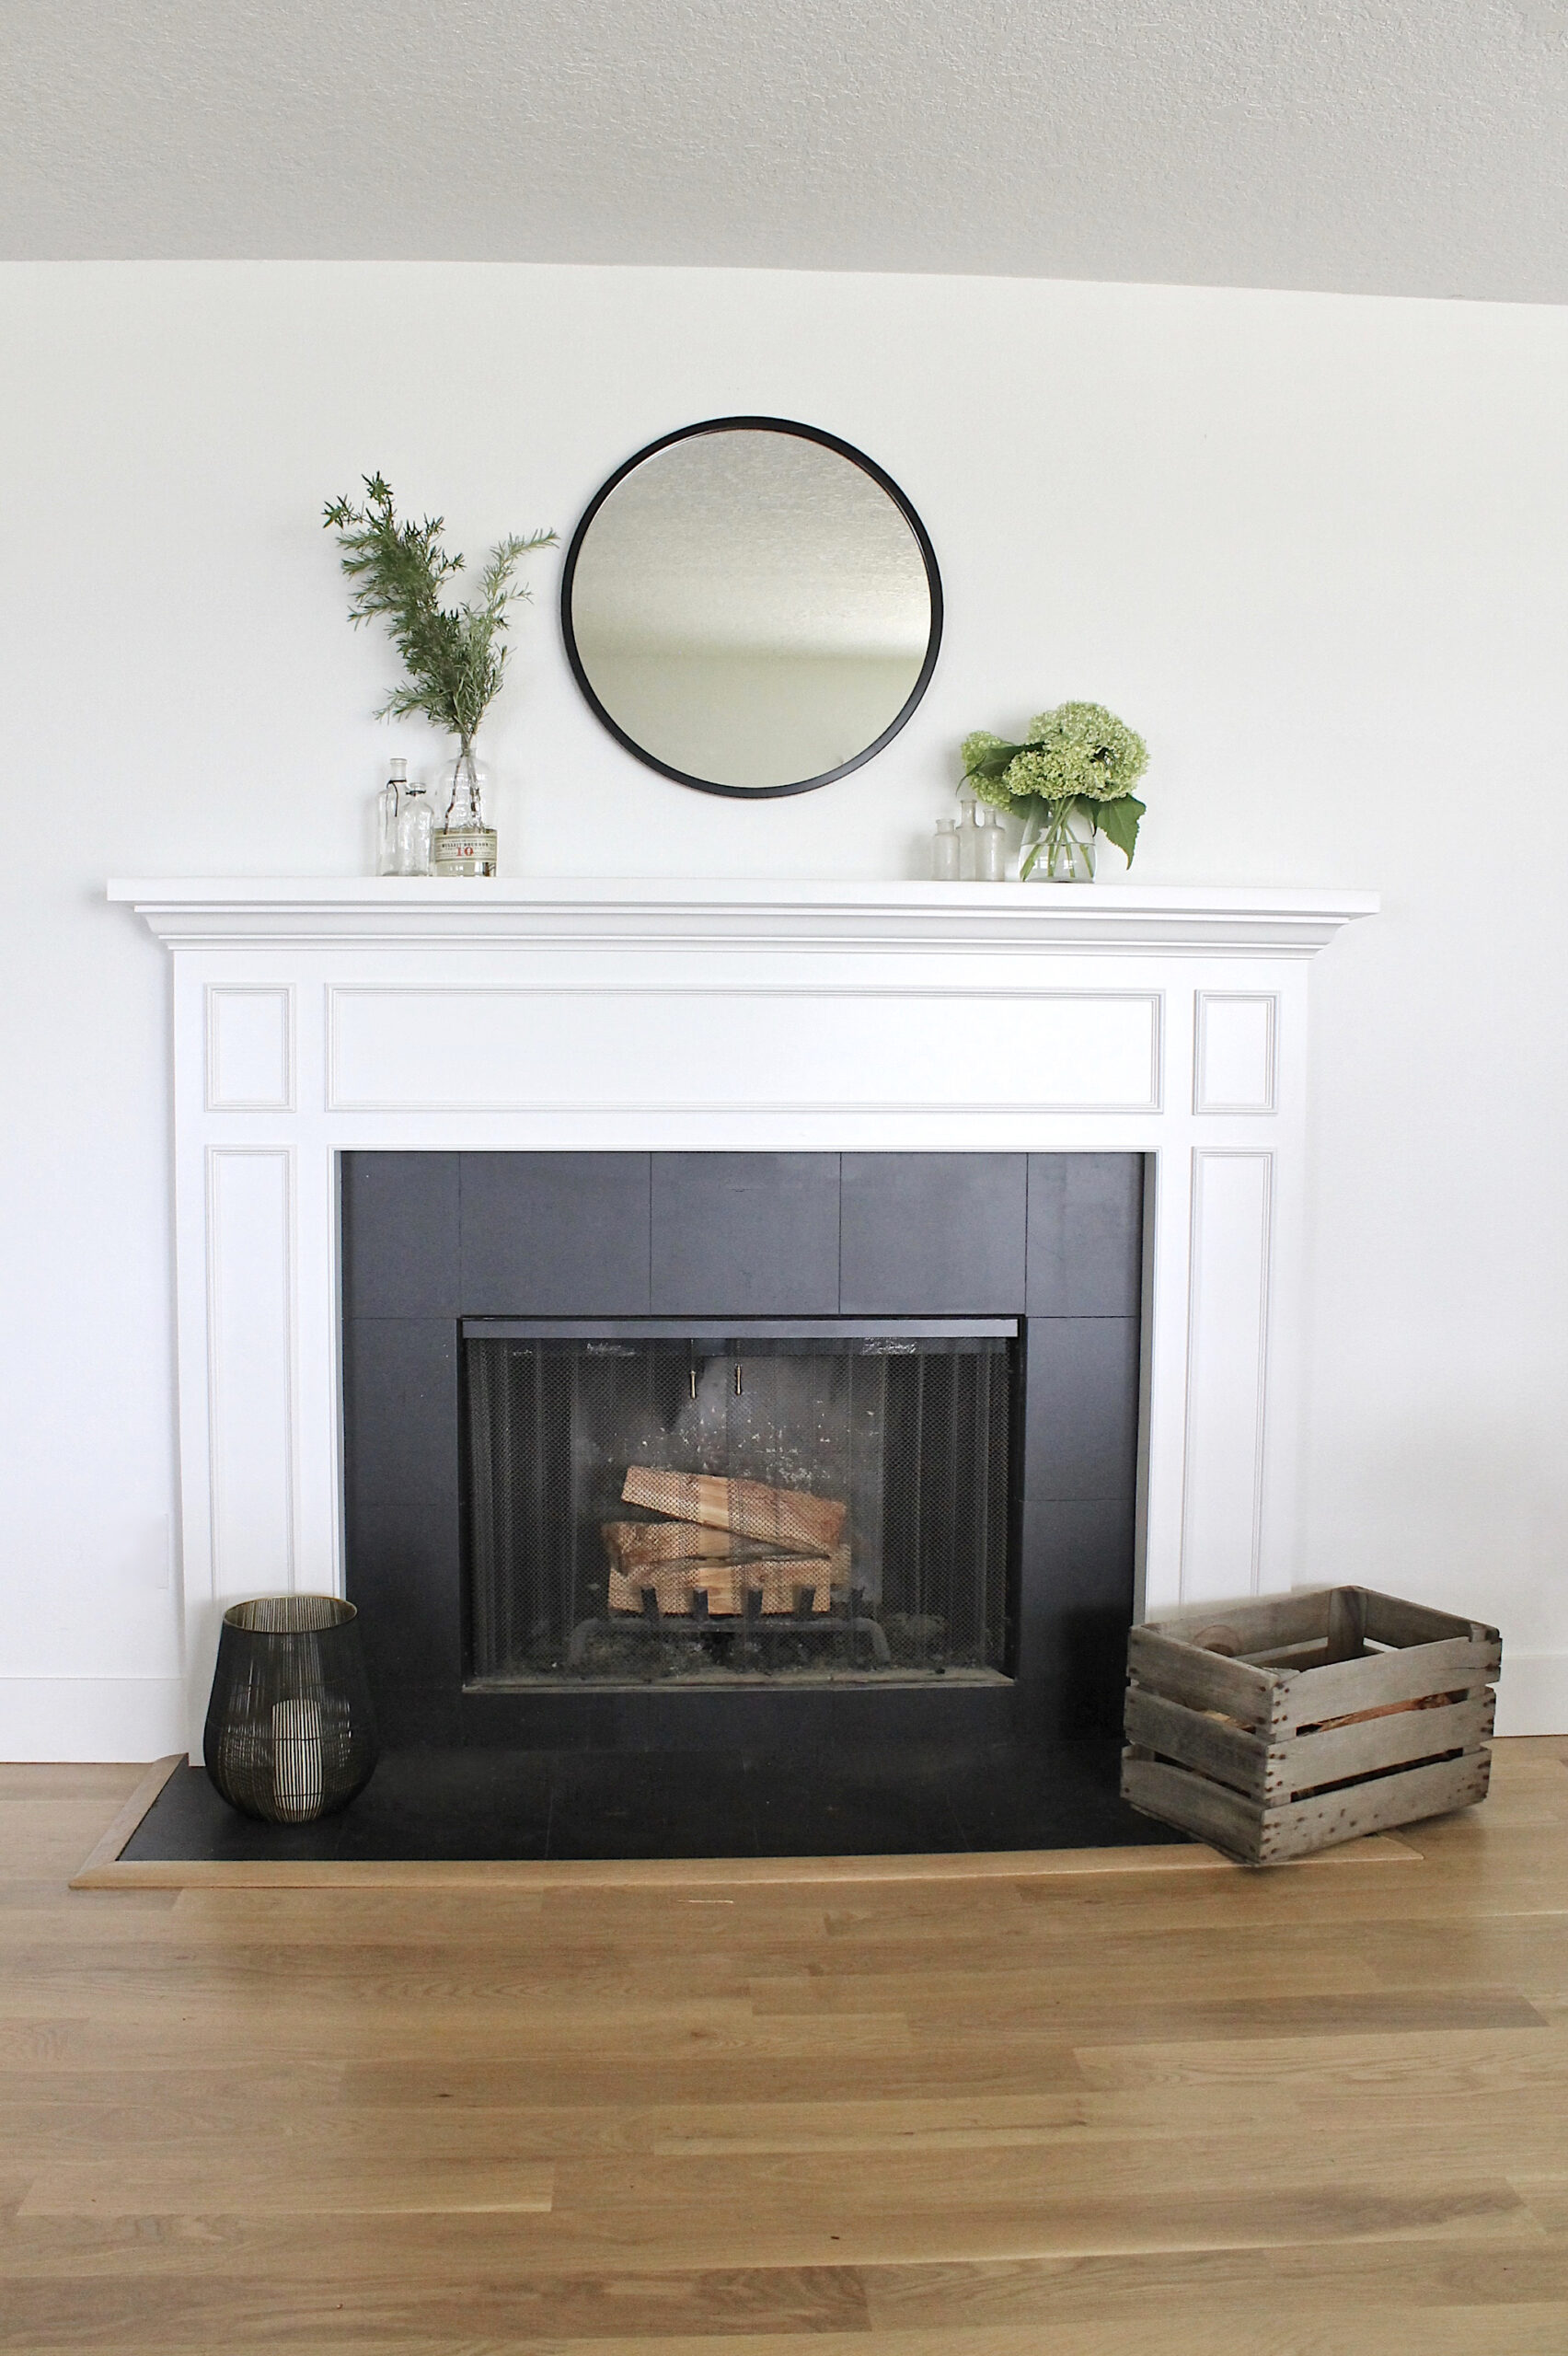 How To Paint A Ceramic Tile Fireplace, Painting A Wooden Fireplace Surround Black And White